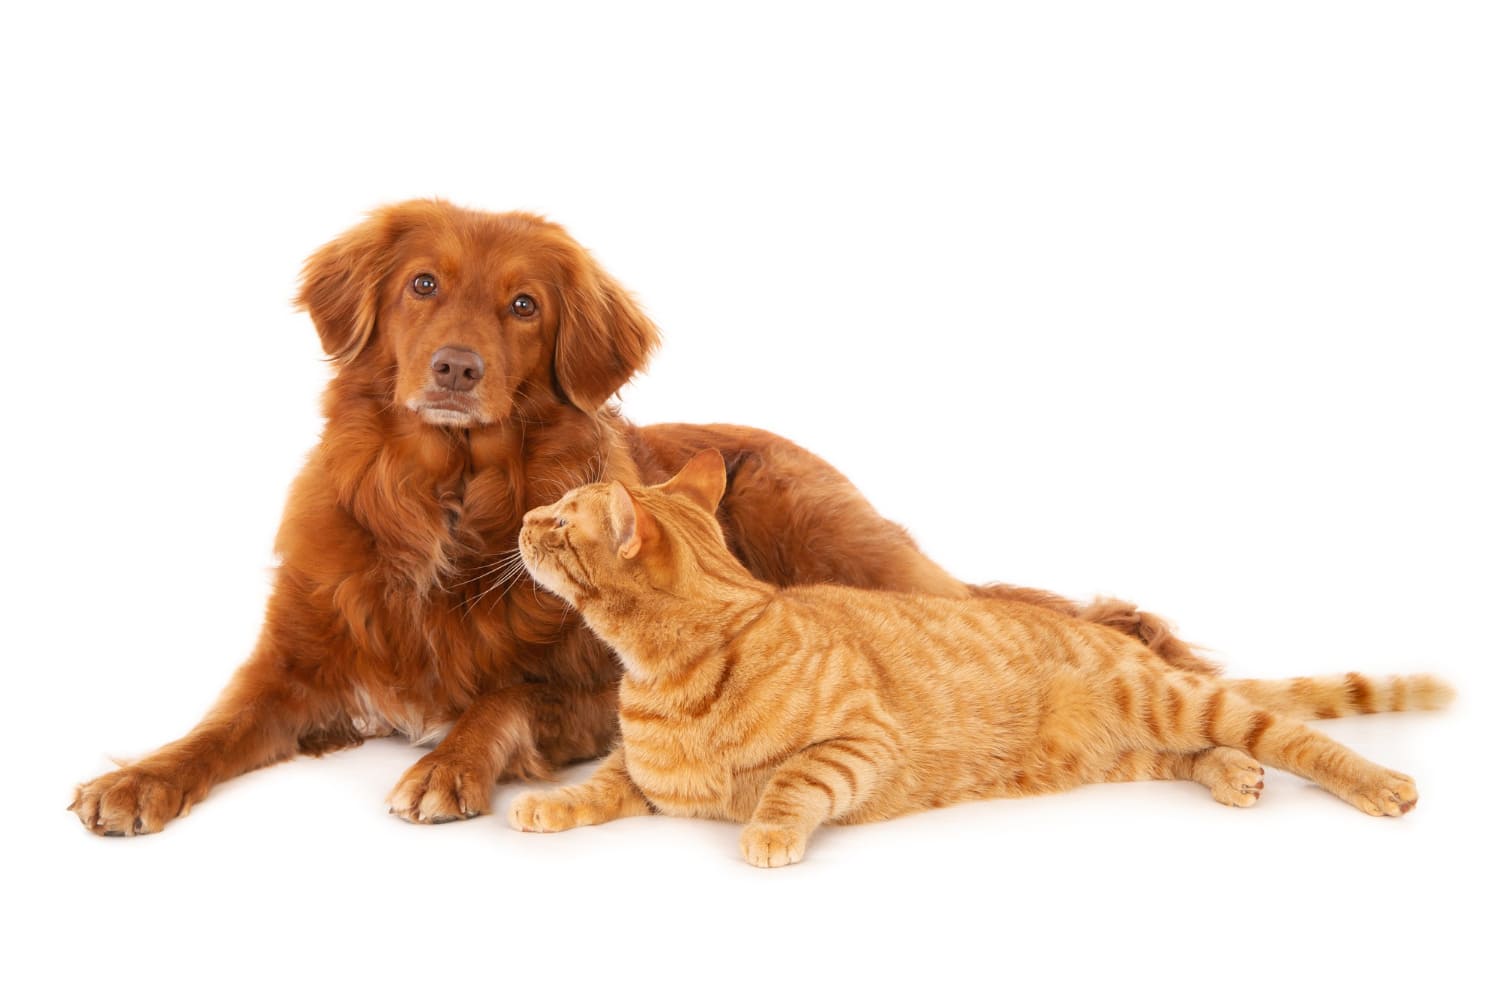 Dog and cat about